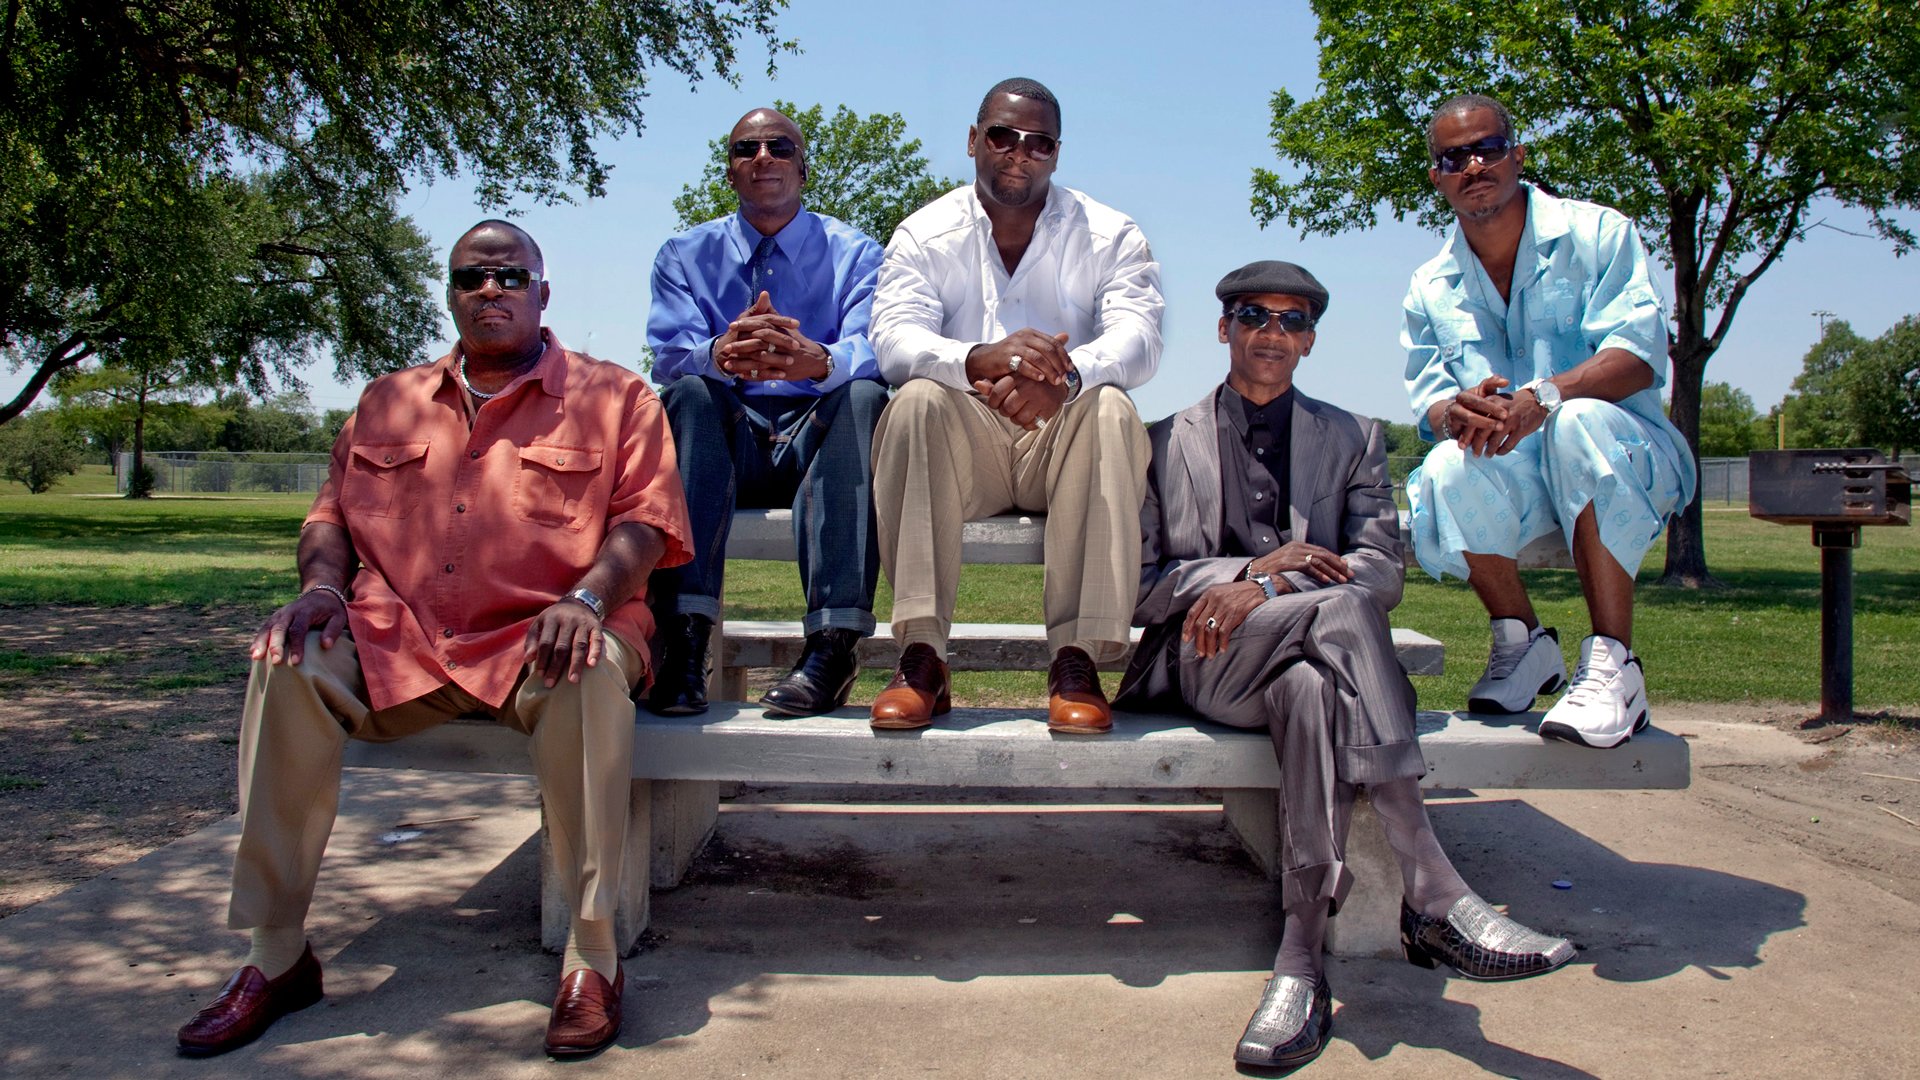 Some of the Dallas exonerees, from left to right: Claude A. Simmons Jr., Thomas McGowan, Christopher Scott, Johnnie Lindsey and Richard Miles.